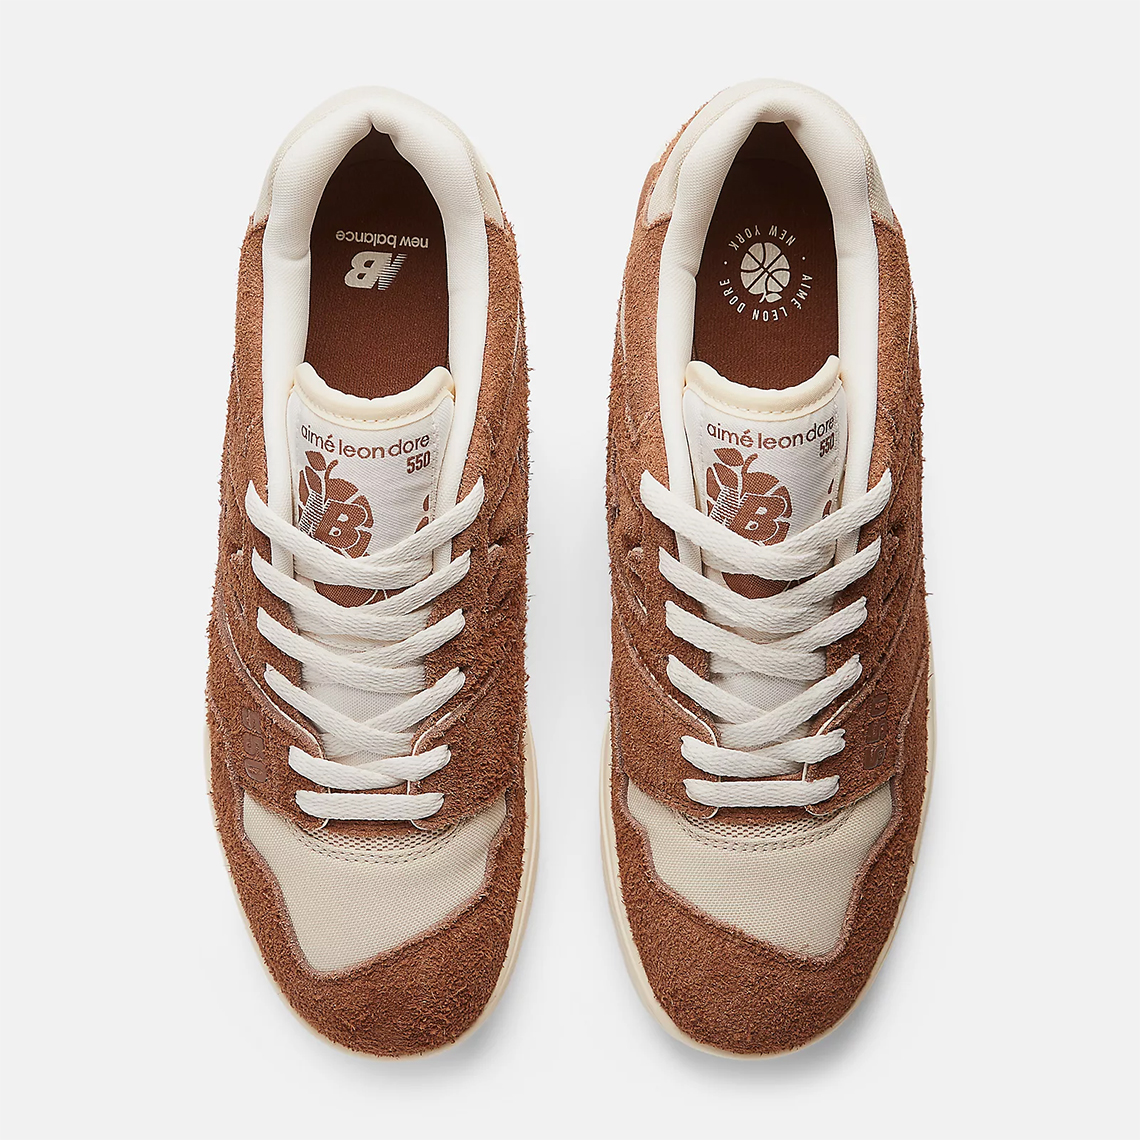 Aime Leon Dore These New Balance CM1700 Sand Grey have a Tan lining that compliments the True Brown Bb550db1 3